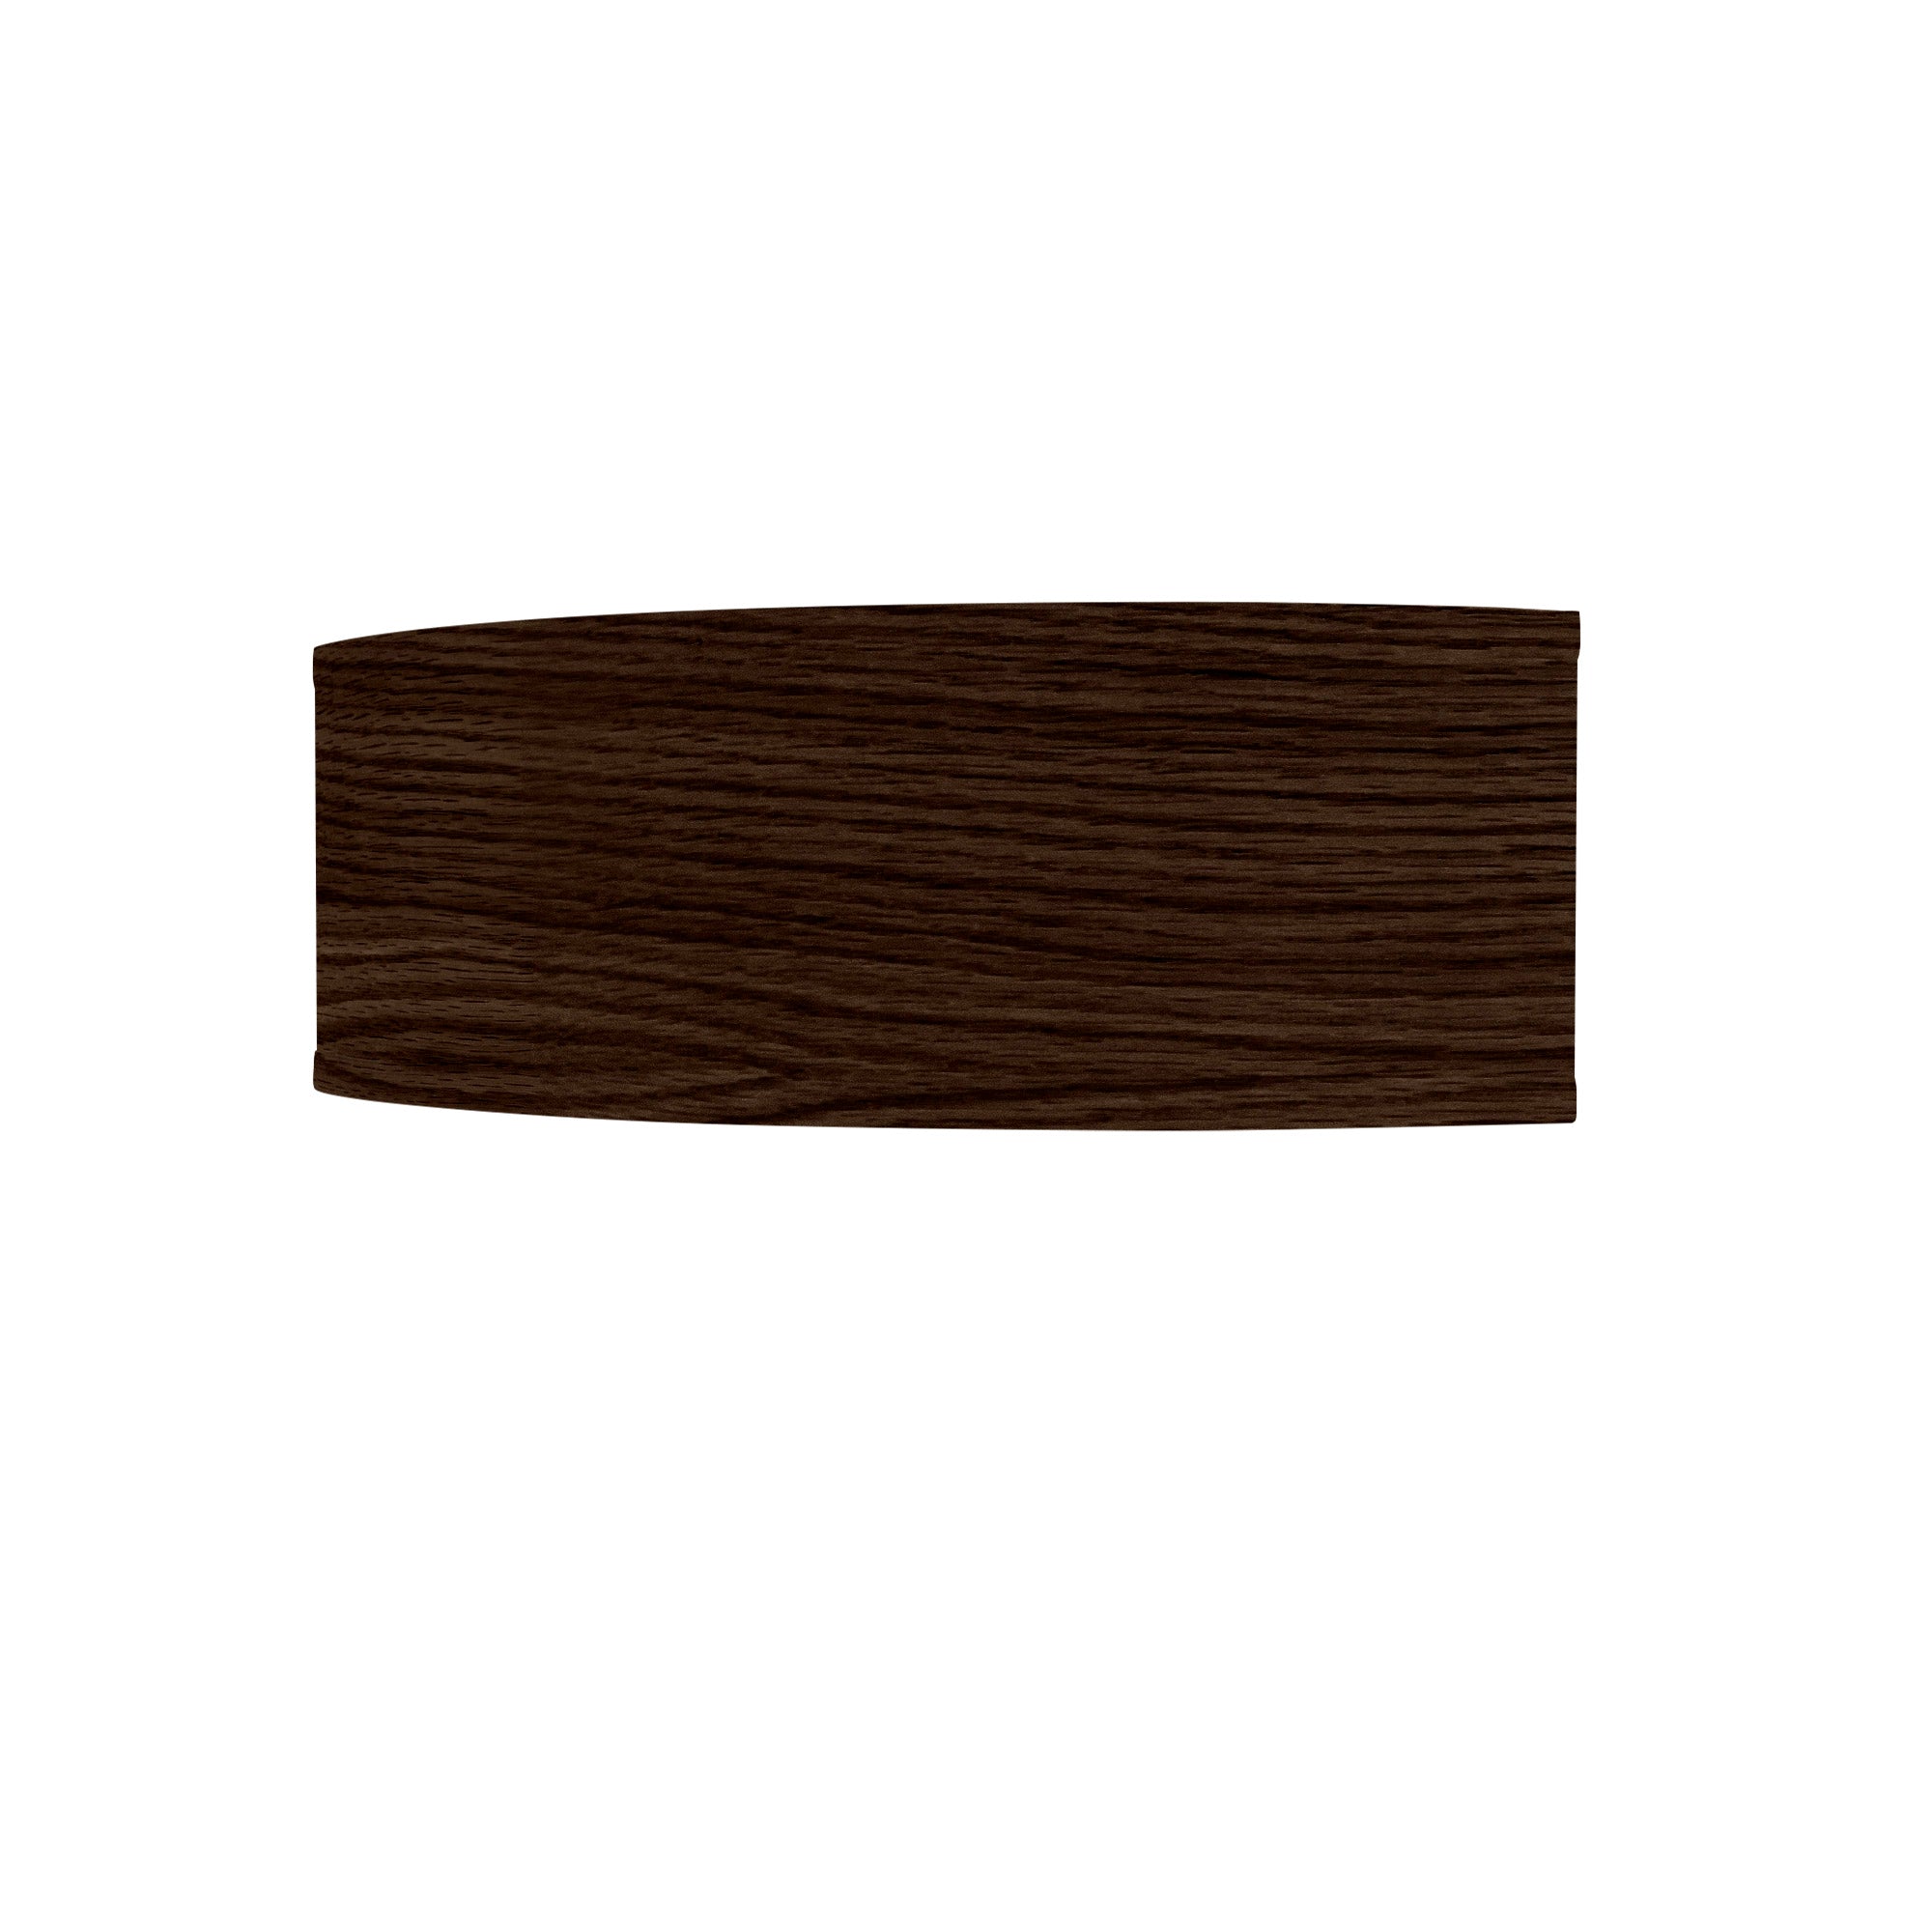 The Mora Wall Sconce from Seascape Fixtures with a photo veneer shade in chocolate color.